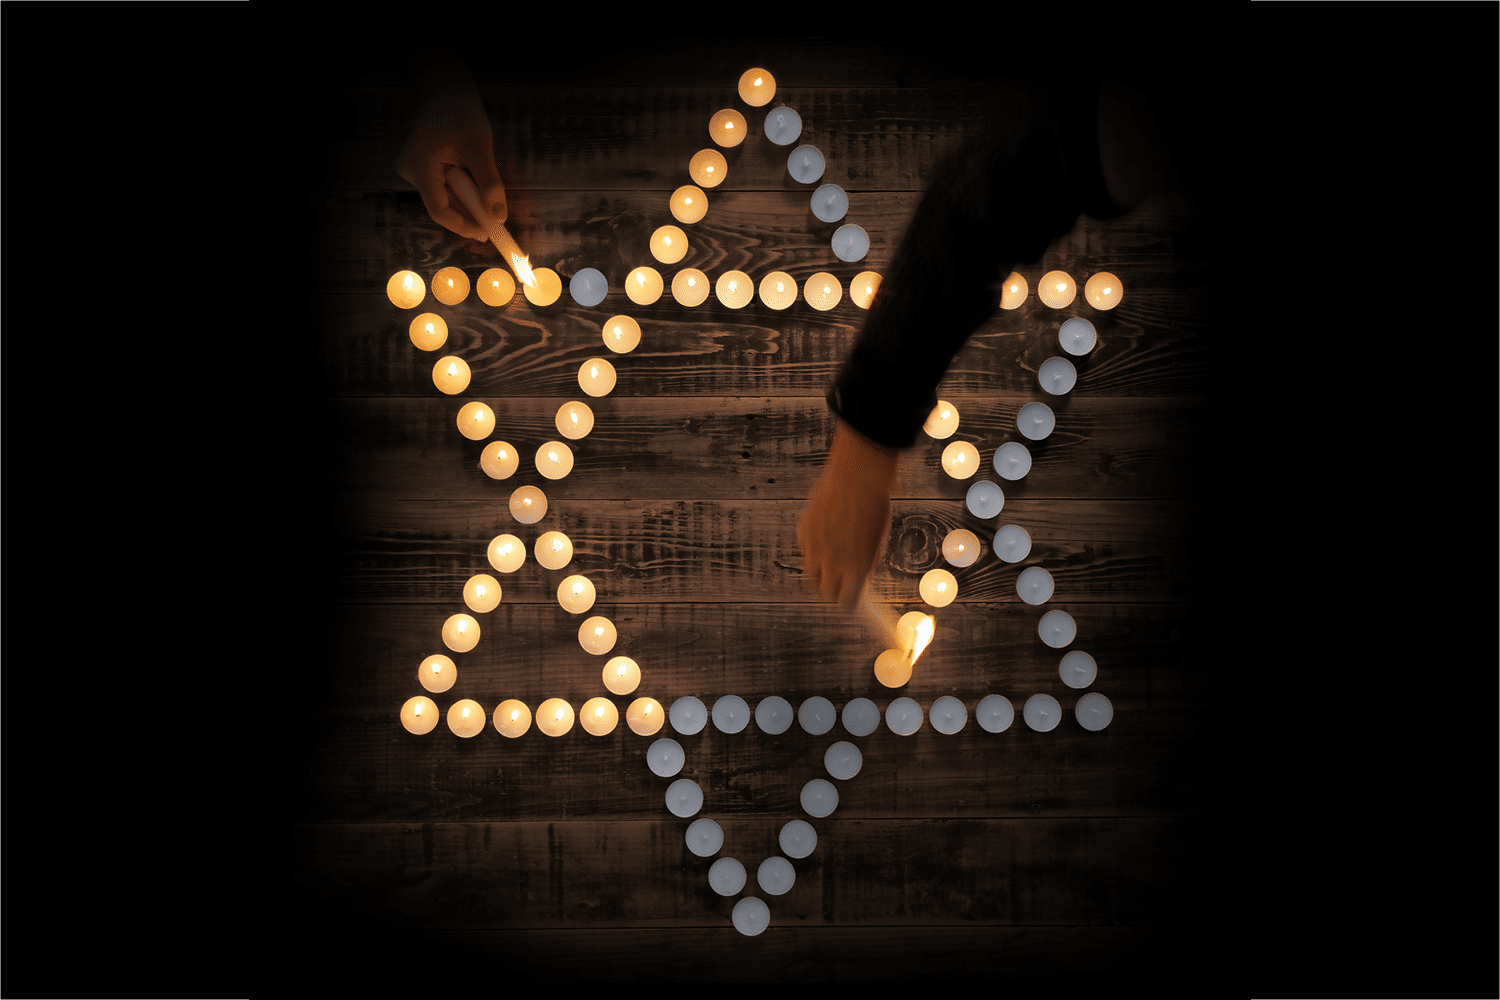 Two people lighting candles in the shape of the Jewish Star of David.